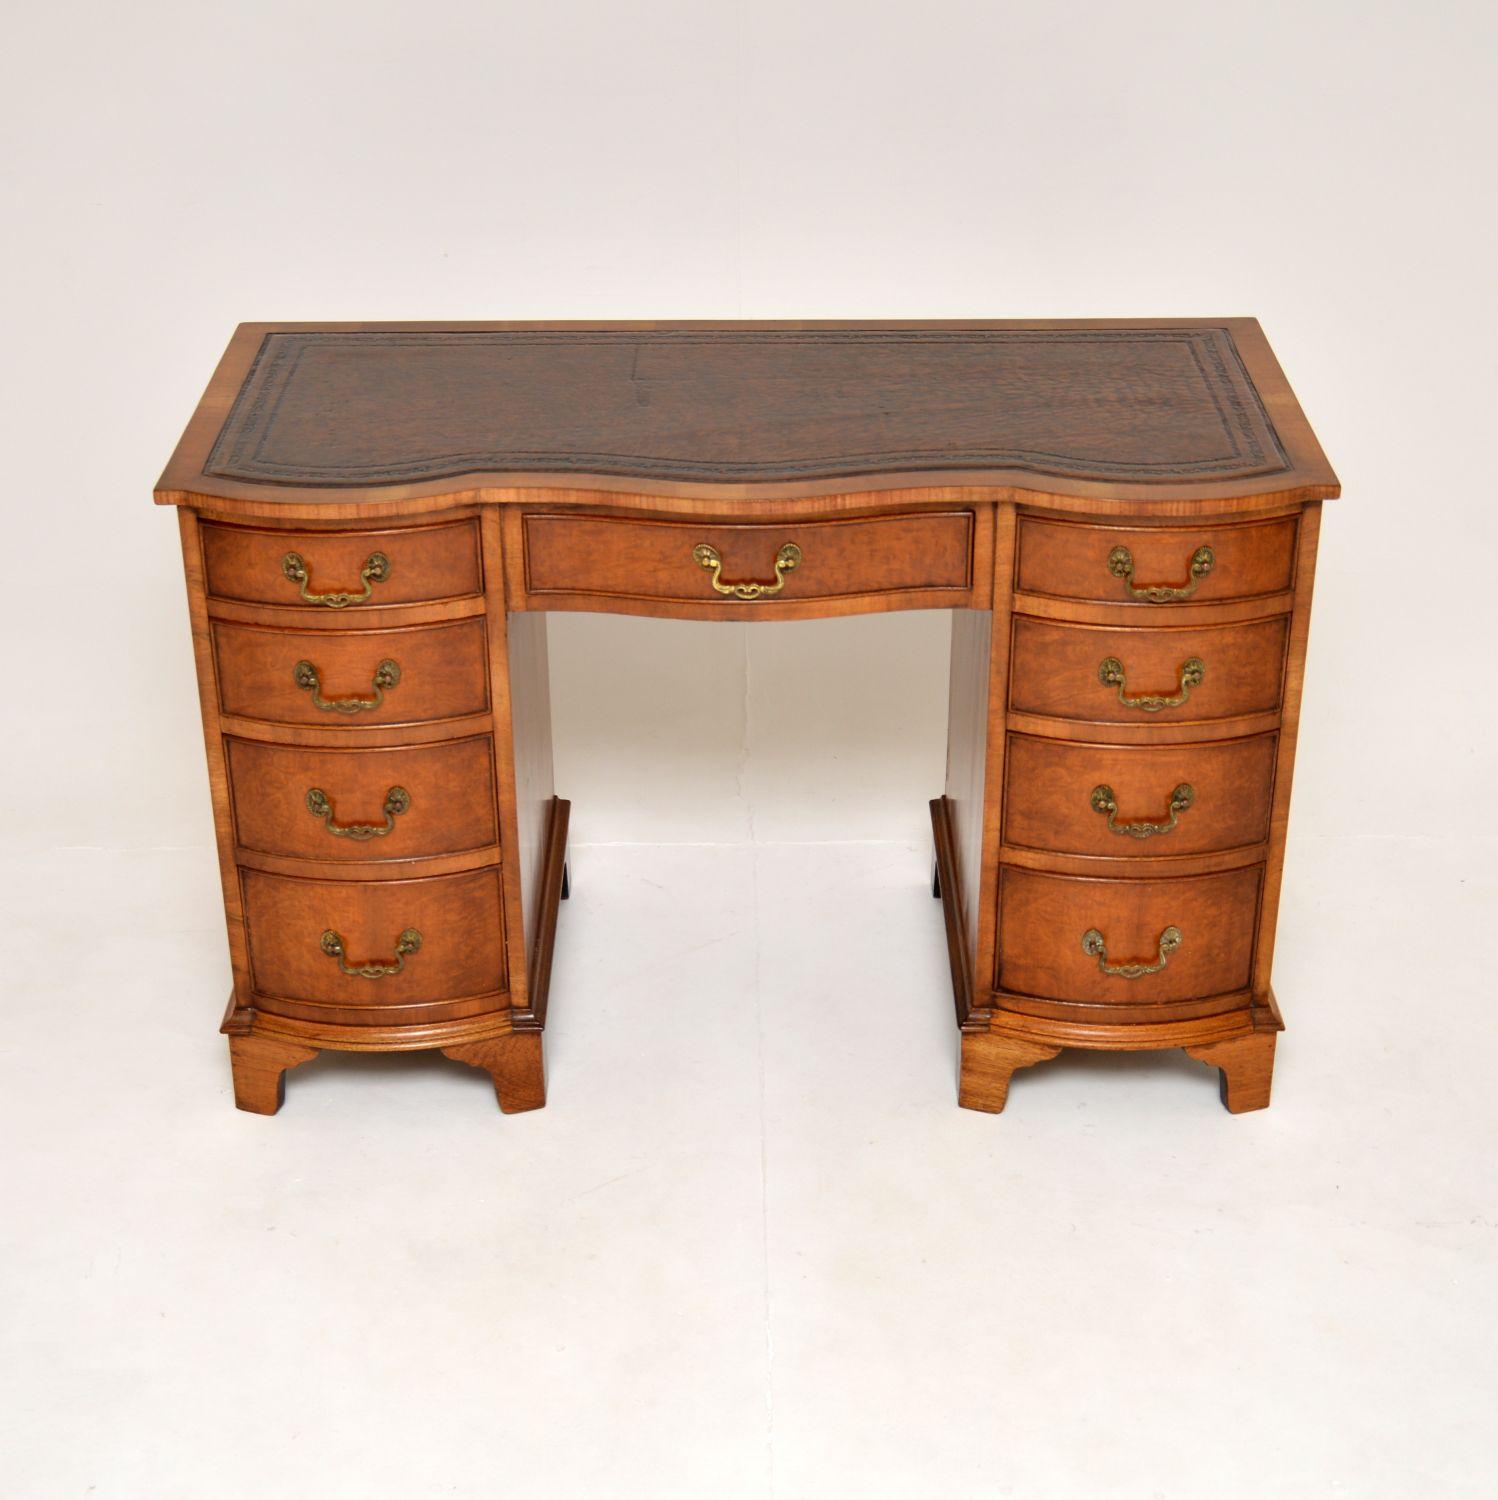 A stunning antique leather top pedestal desk in burr walnut. This is in the Georgian style, it dates from around the 1930-50’s.

The quality is superb, this has a gorgeous inset leather writing surface with tooled edges. There are amazing burr